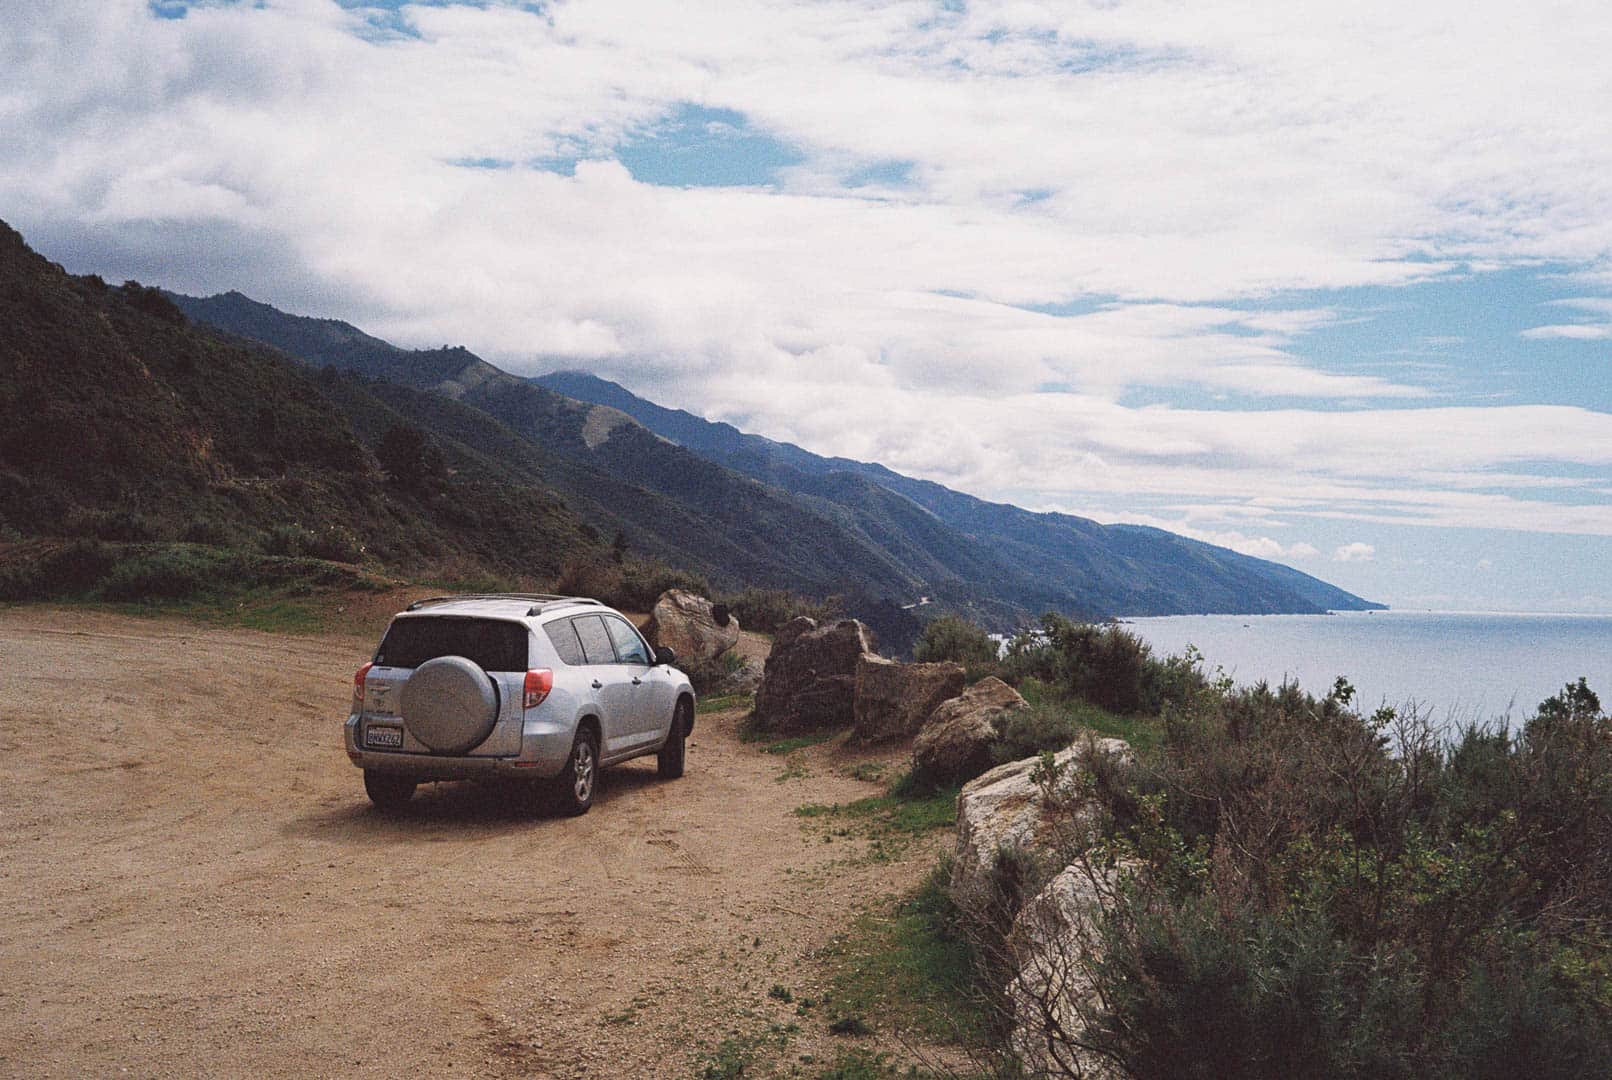 An old Toyota Rav4 pulled over beside the rocky shoreline